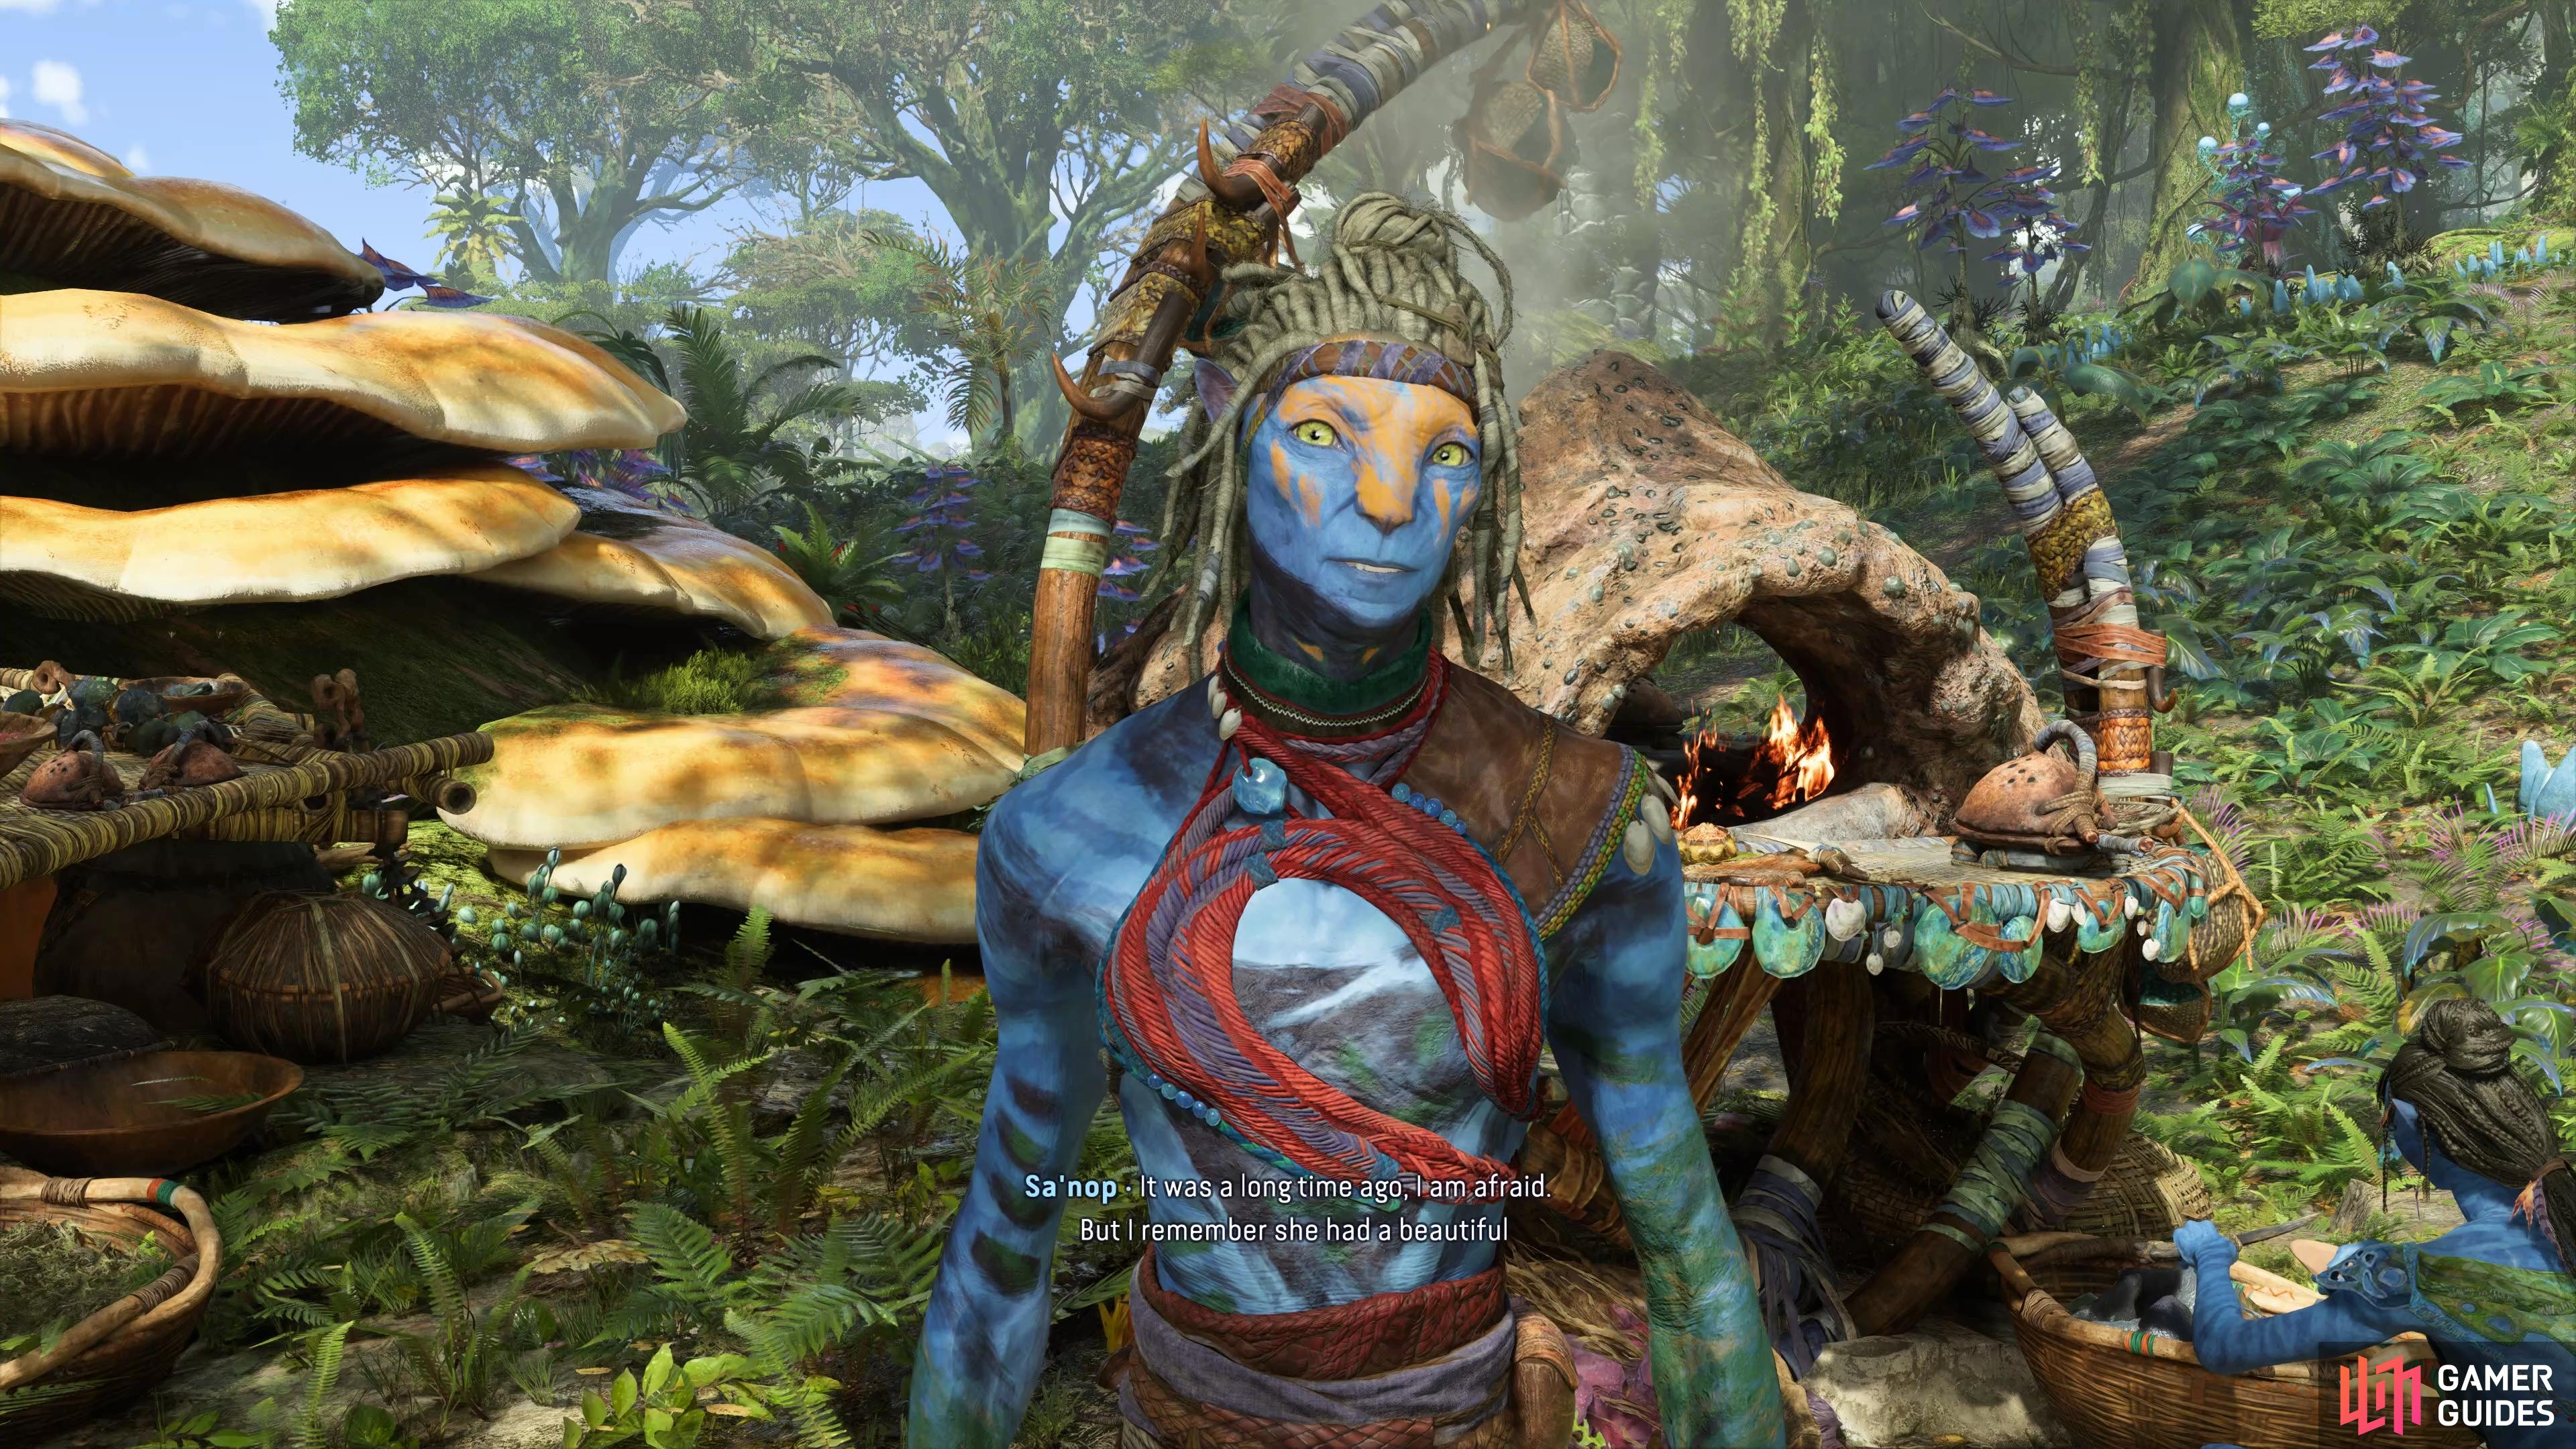 Sa’nop is an older Na’vi who has memories of your mother.